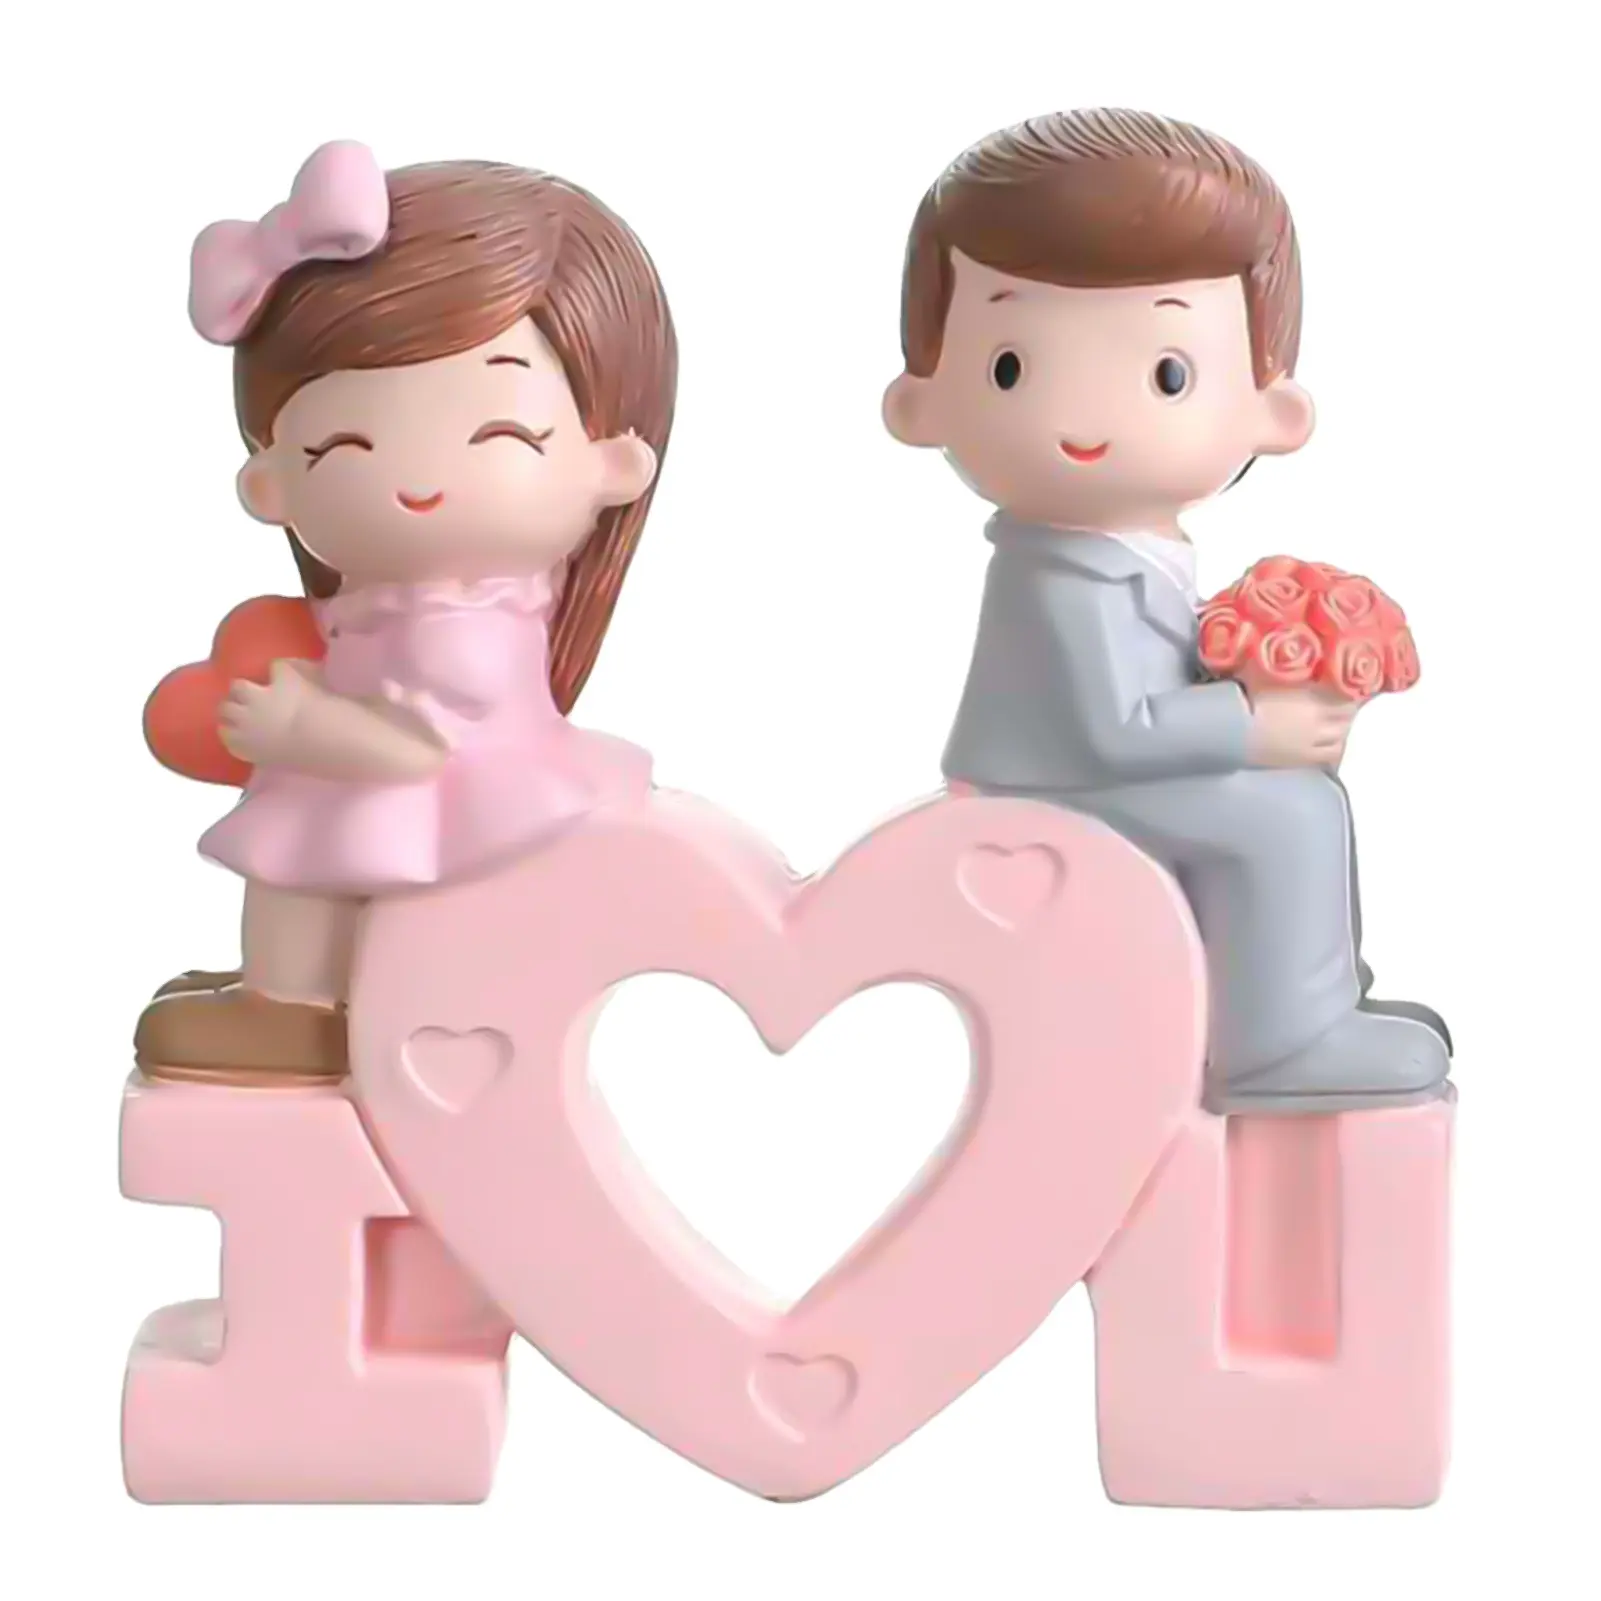 Decorative Couple Dolls Baking Accessory Charming Romantic Resin Cake Topper Ornament for Wedding Party